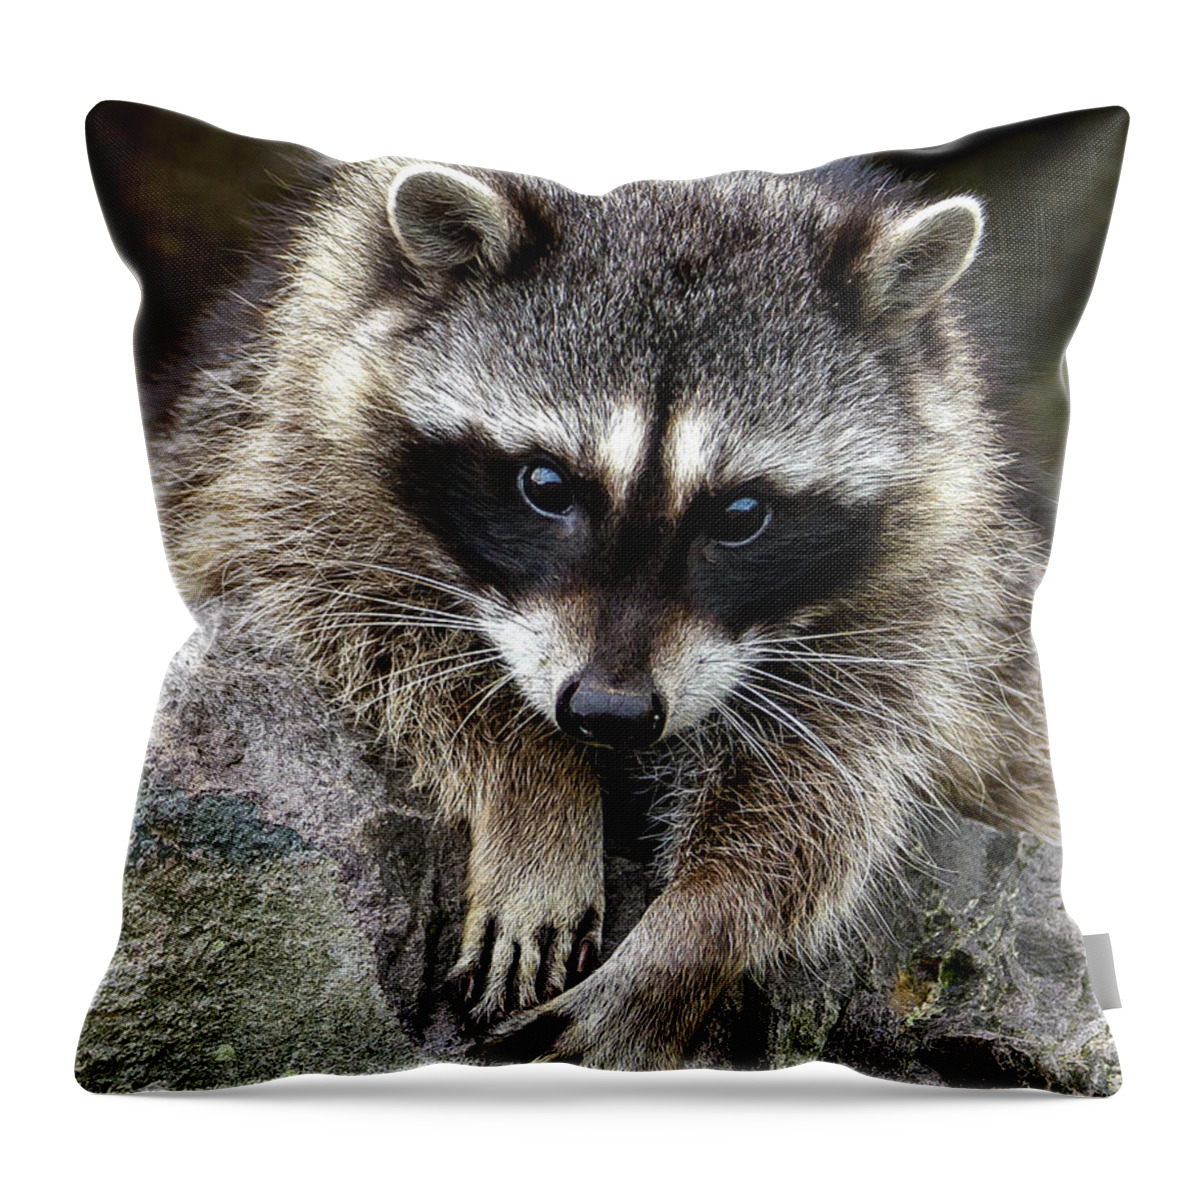 Raccoon Throw Pillow featuring the photograph Young Raccoon by Jerry Cahill